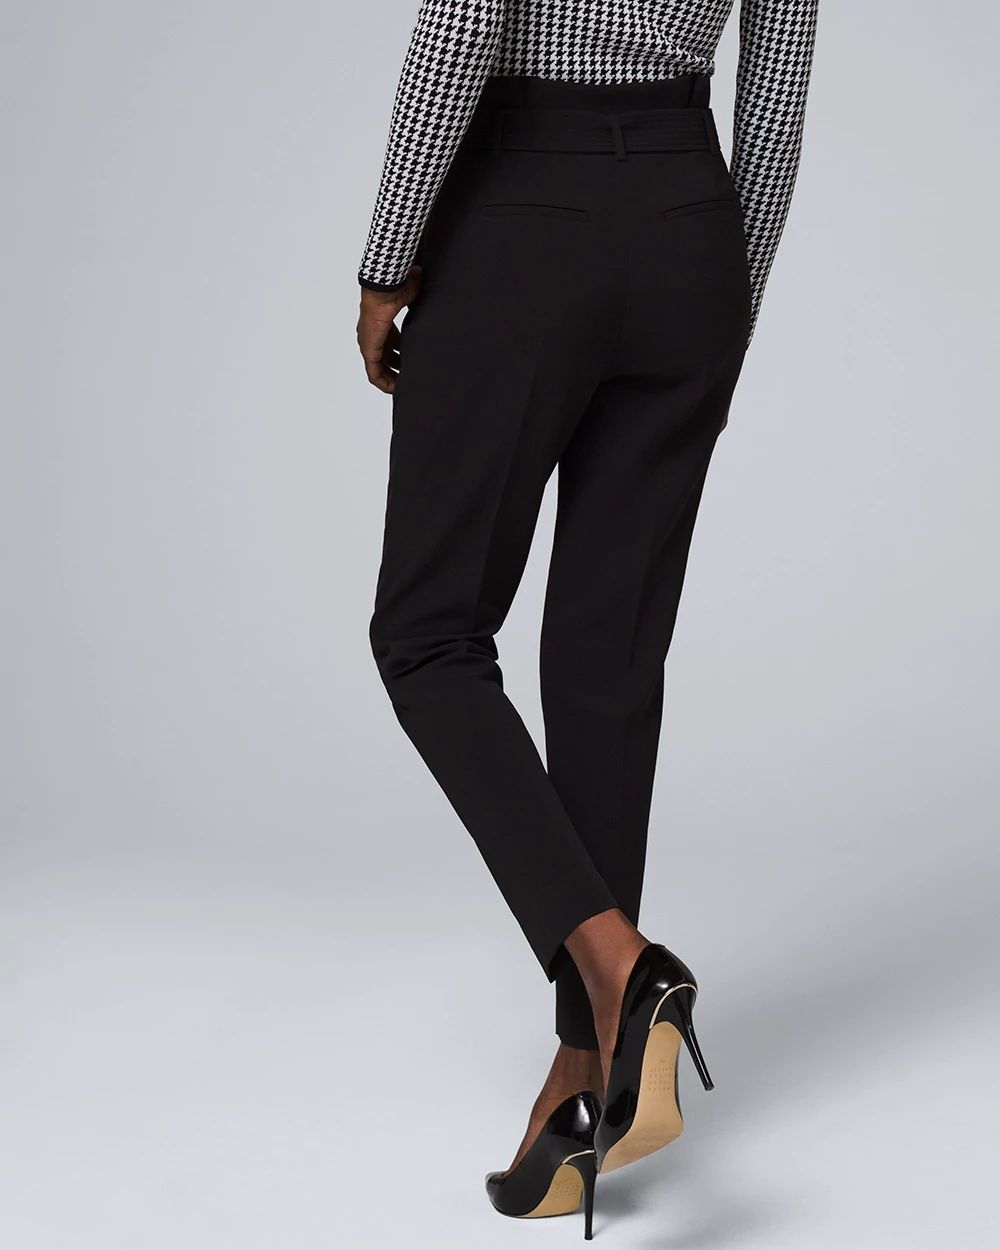 High-Waist Tapered Ankle Pants click to view larger image.